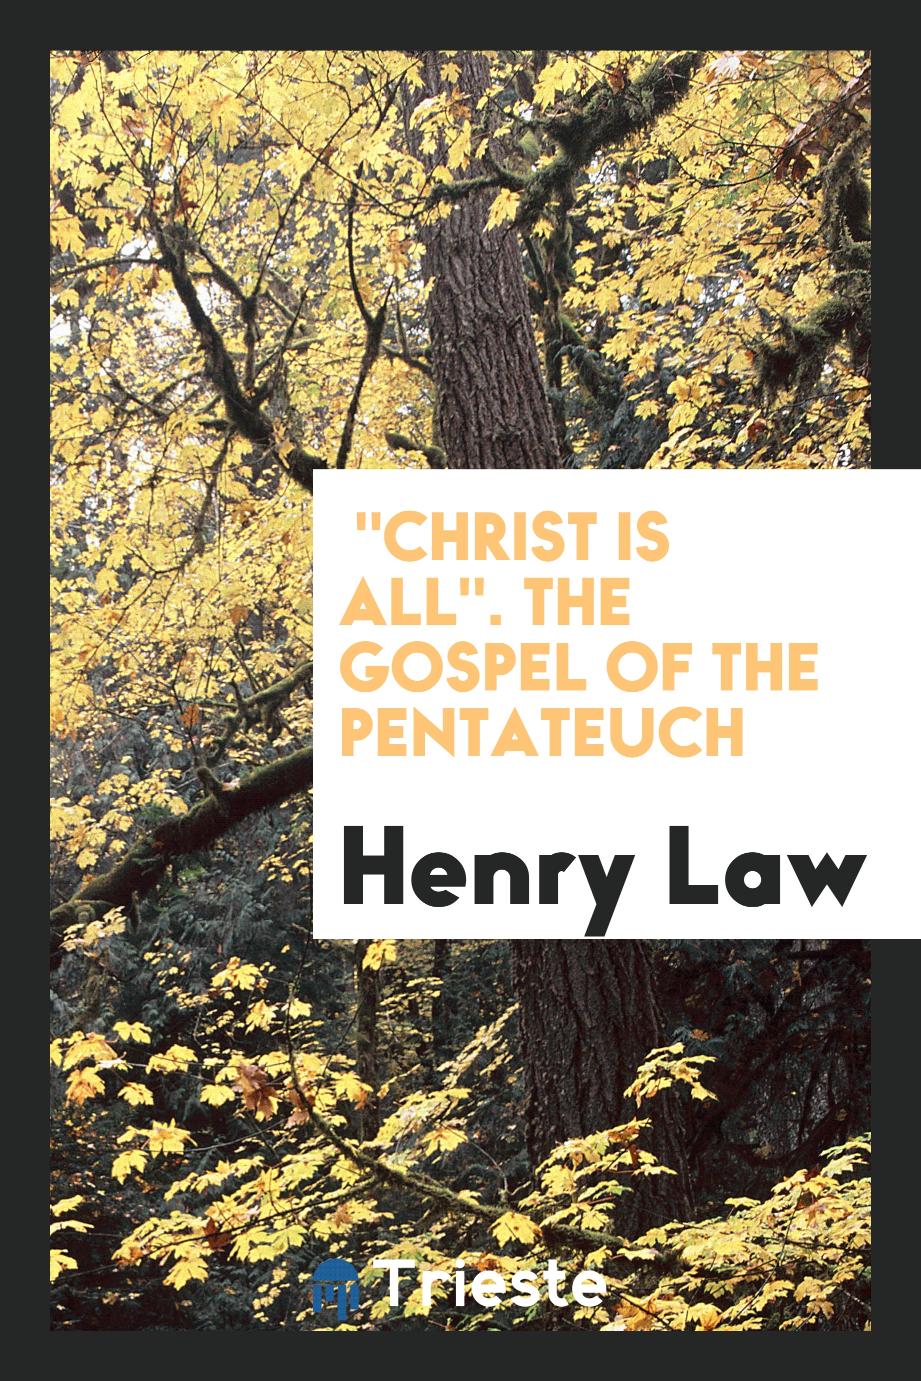 "Christ Is All". The Gospel of the Pentateuch